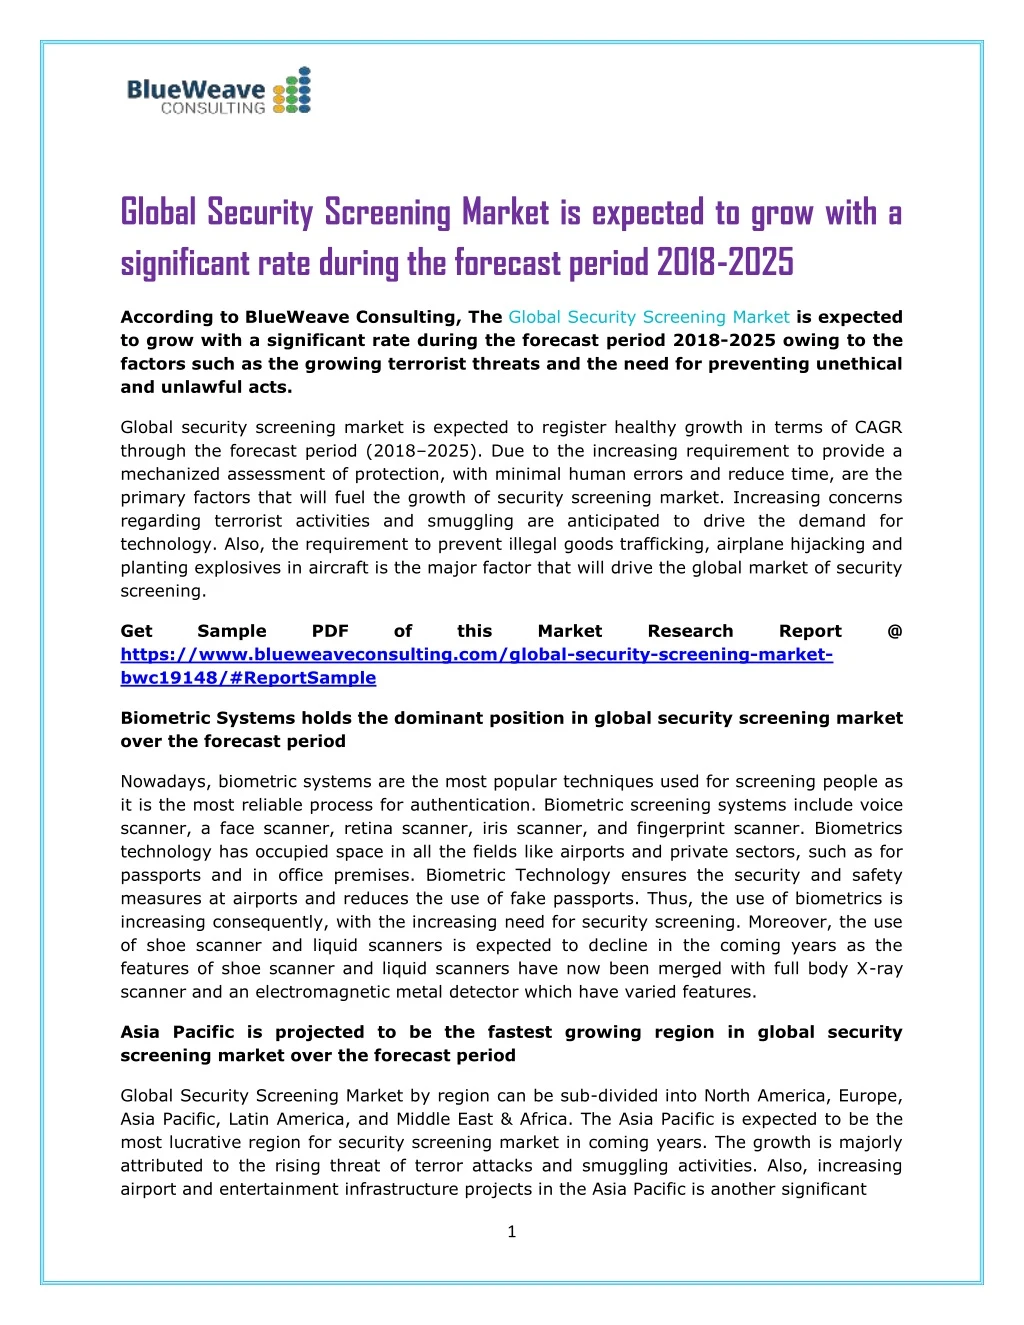 global security screening market is expected